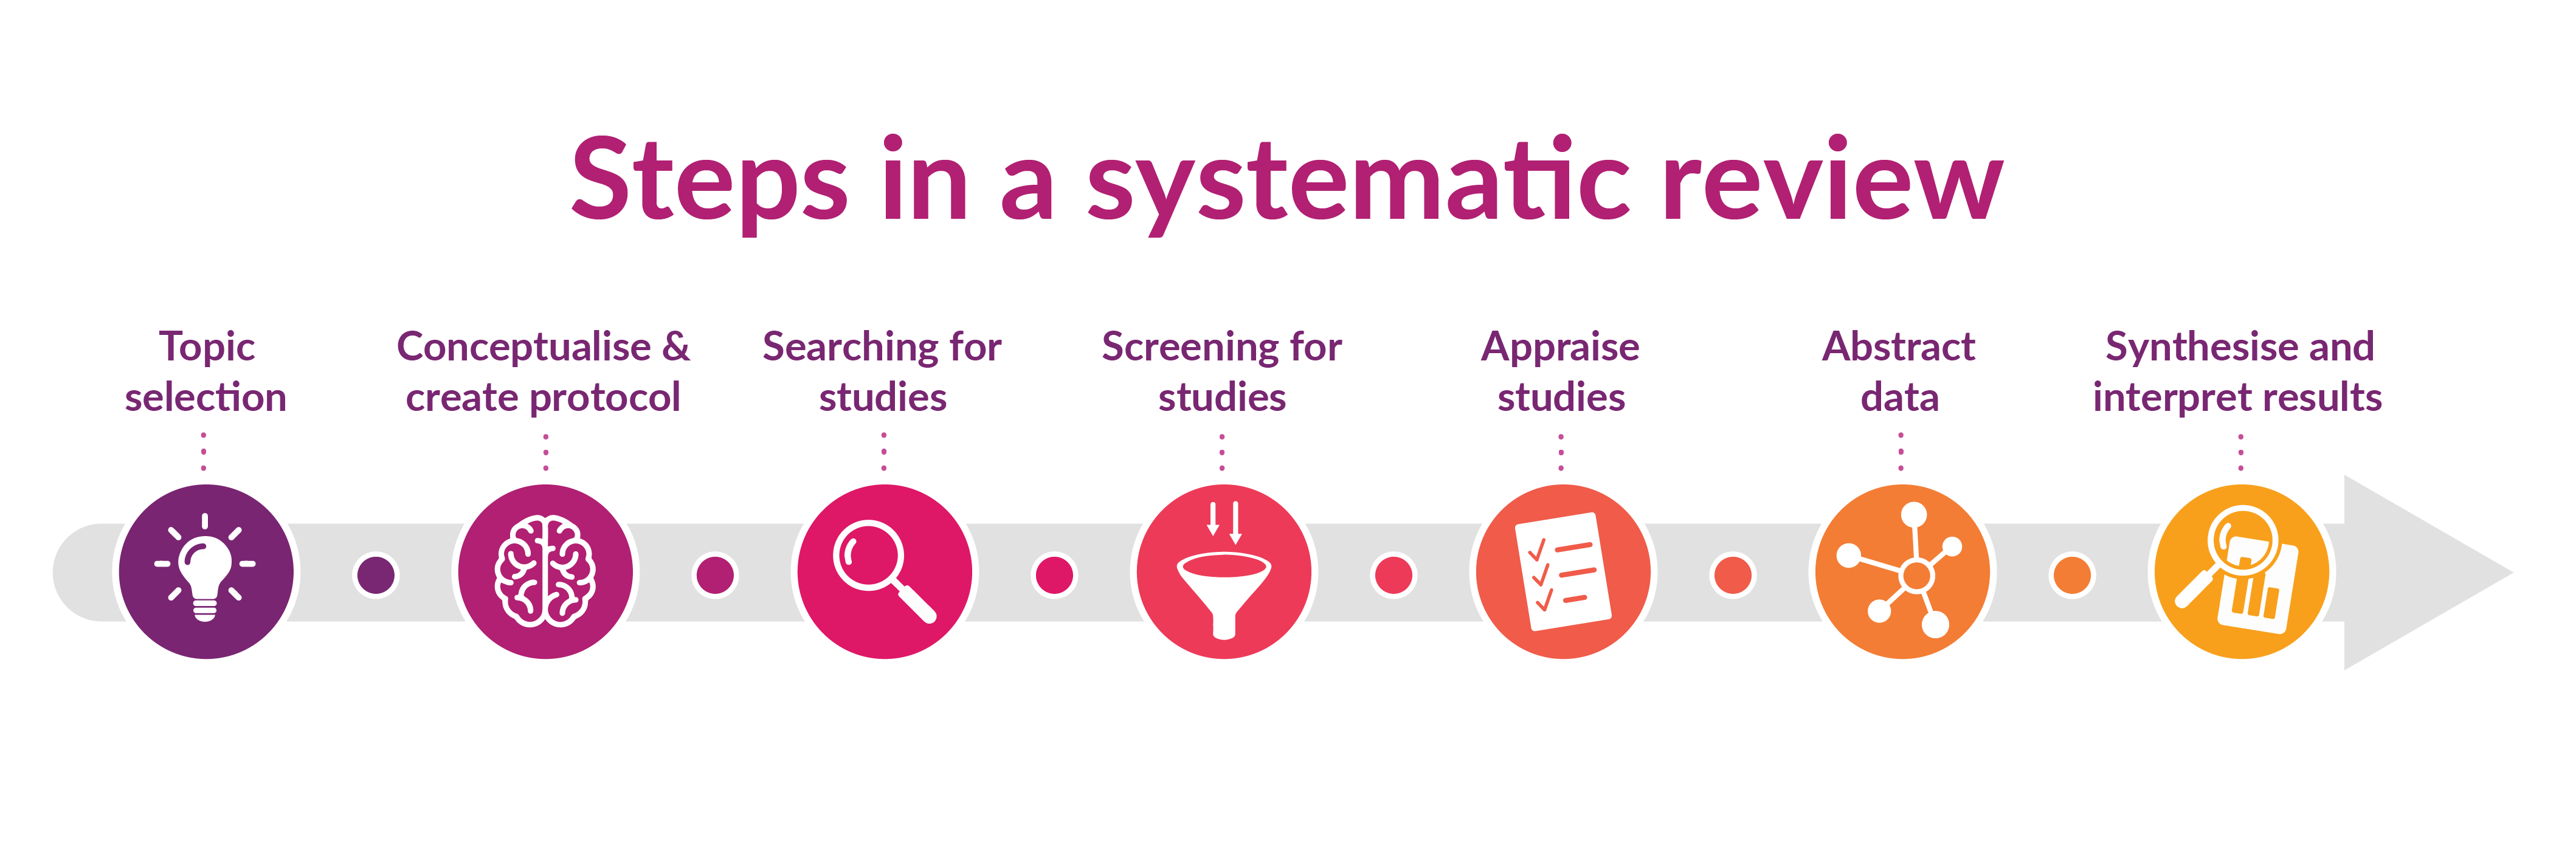 methodology on how to conduct a systematic literature review